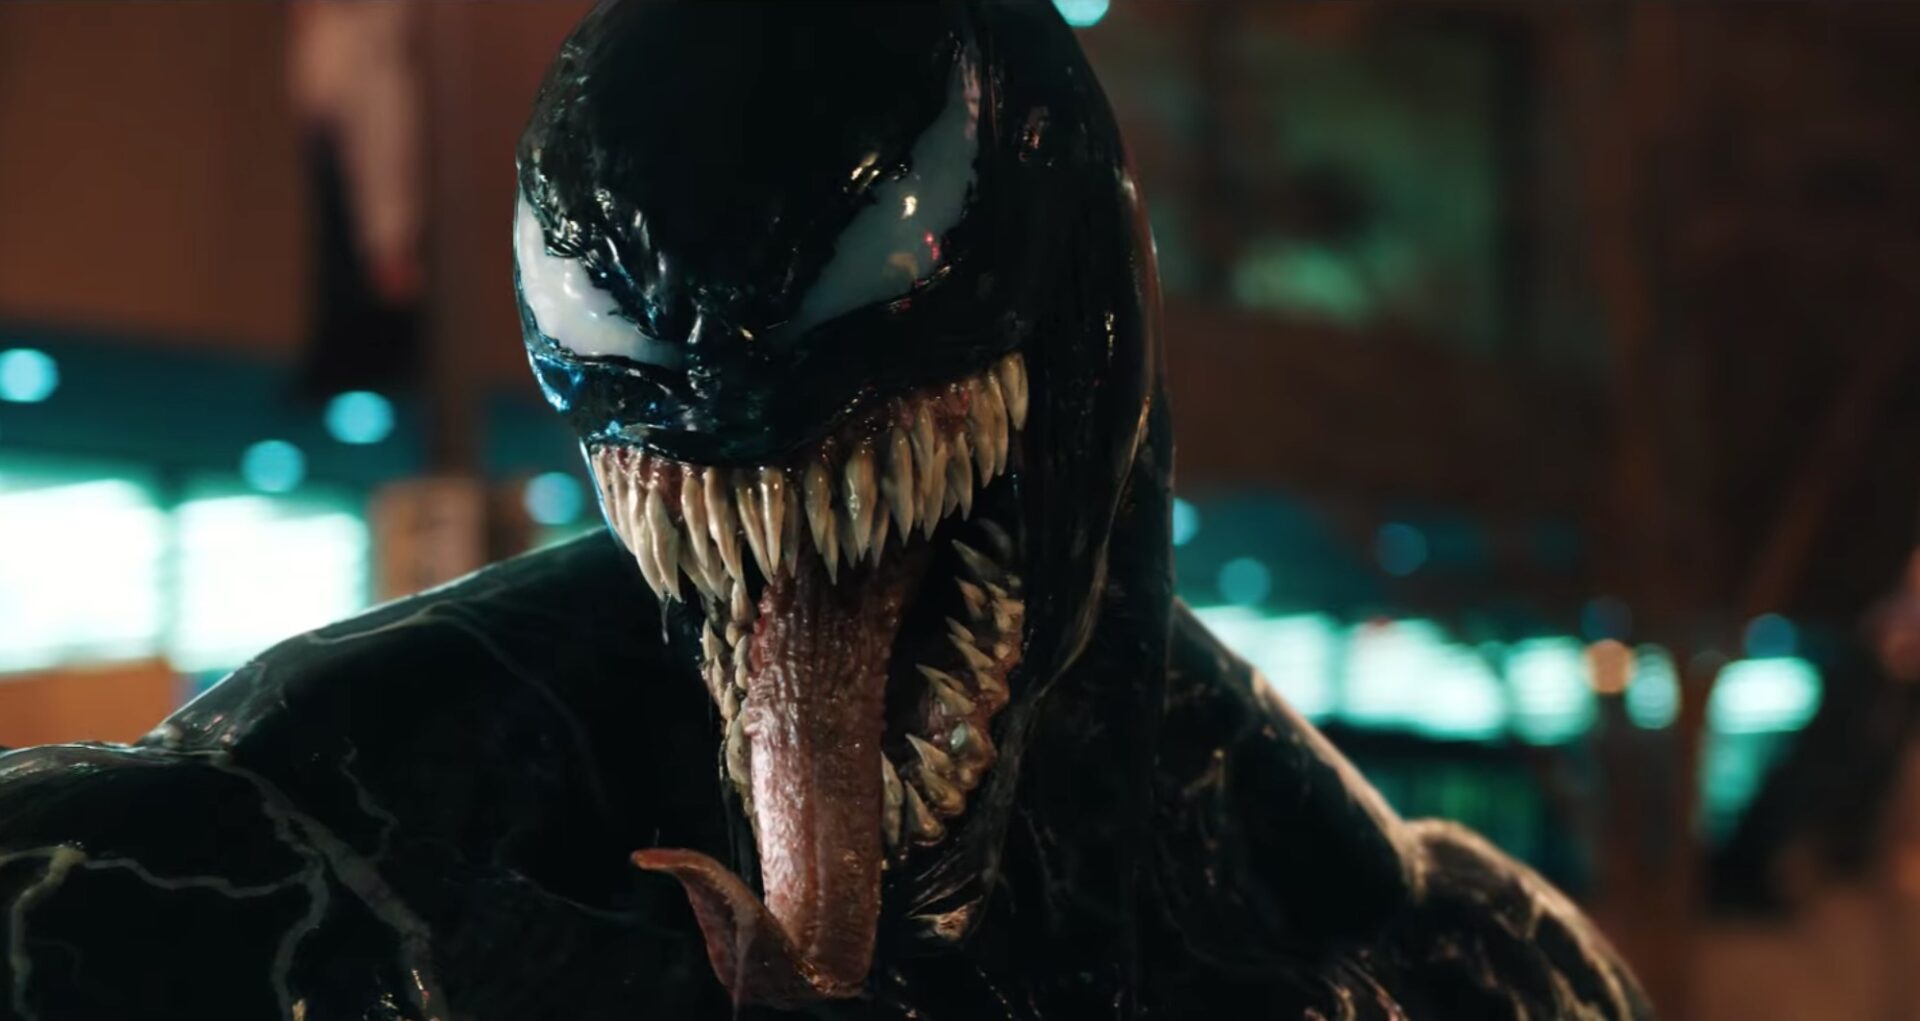 The starring Symbiote shows up in new trailer for ‘Venom’